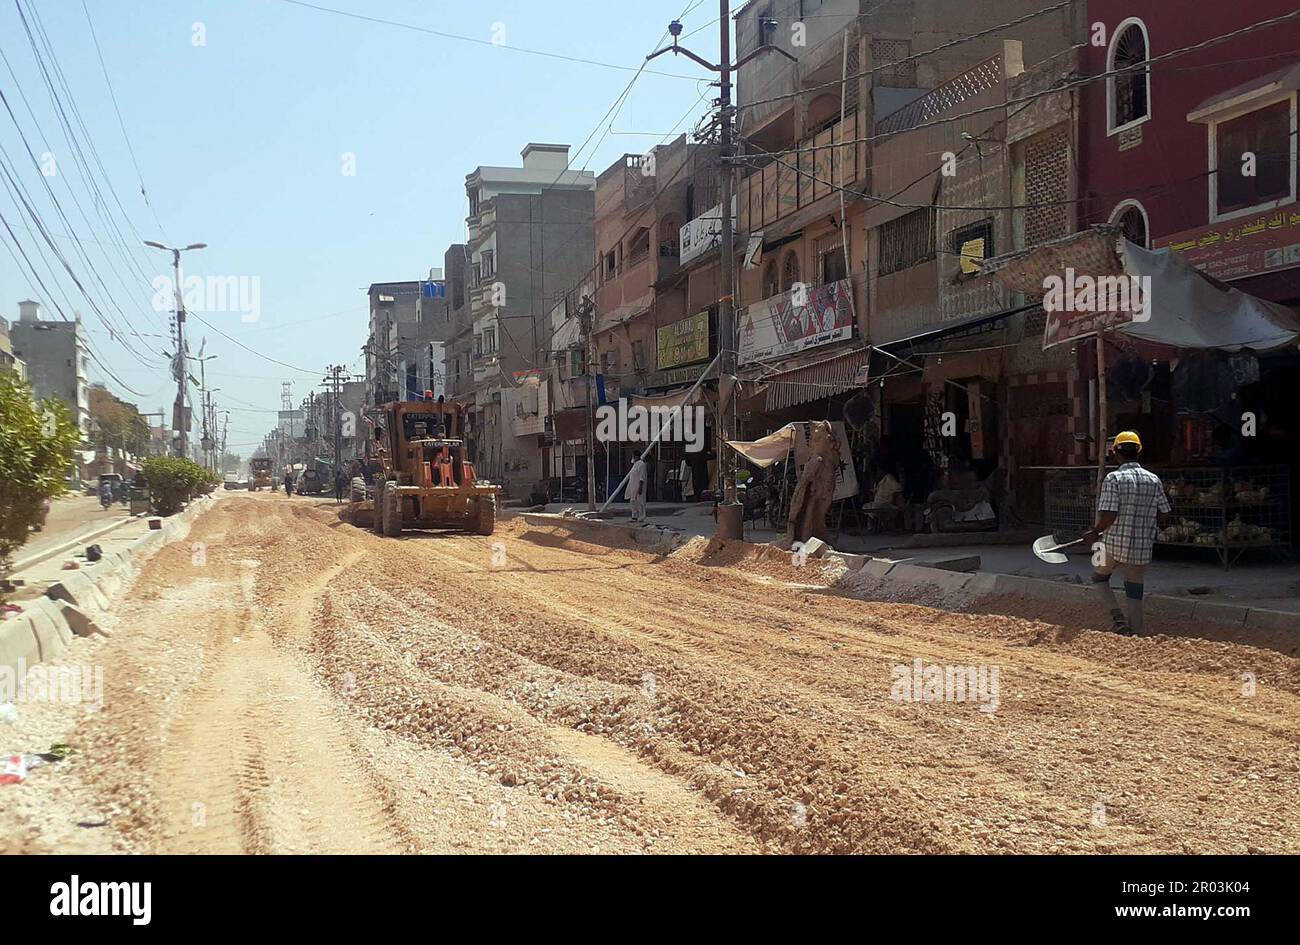 Pakistan. 06th May, 2023. Heavy machineries busy in construction work of road under the supervision of local government department, located on Malir Saudabad area in Karachi on Saturday, May 6, 2023. Credit: Asianet-Pakistan/Alamy Live News Stock Photo